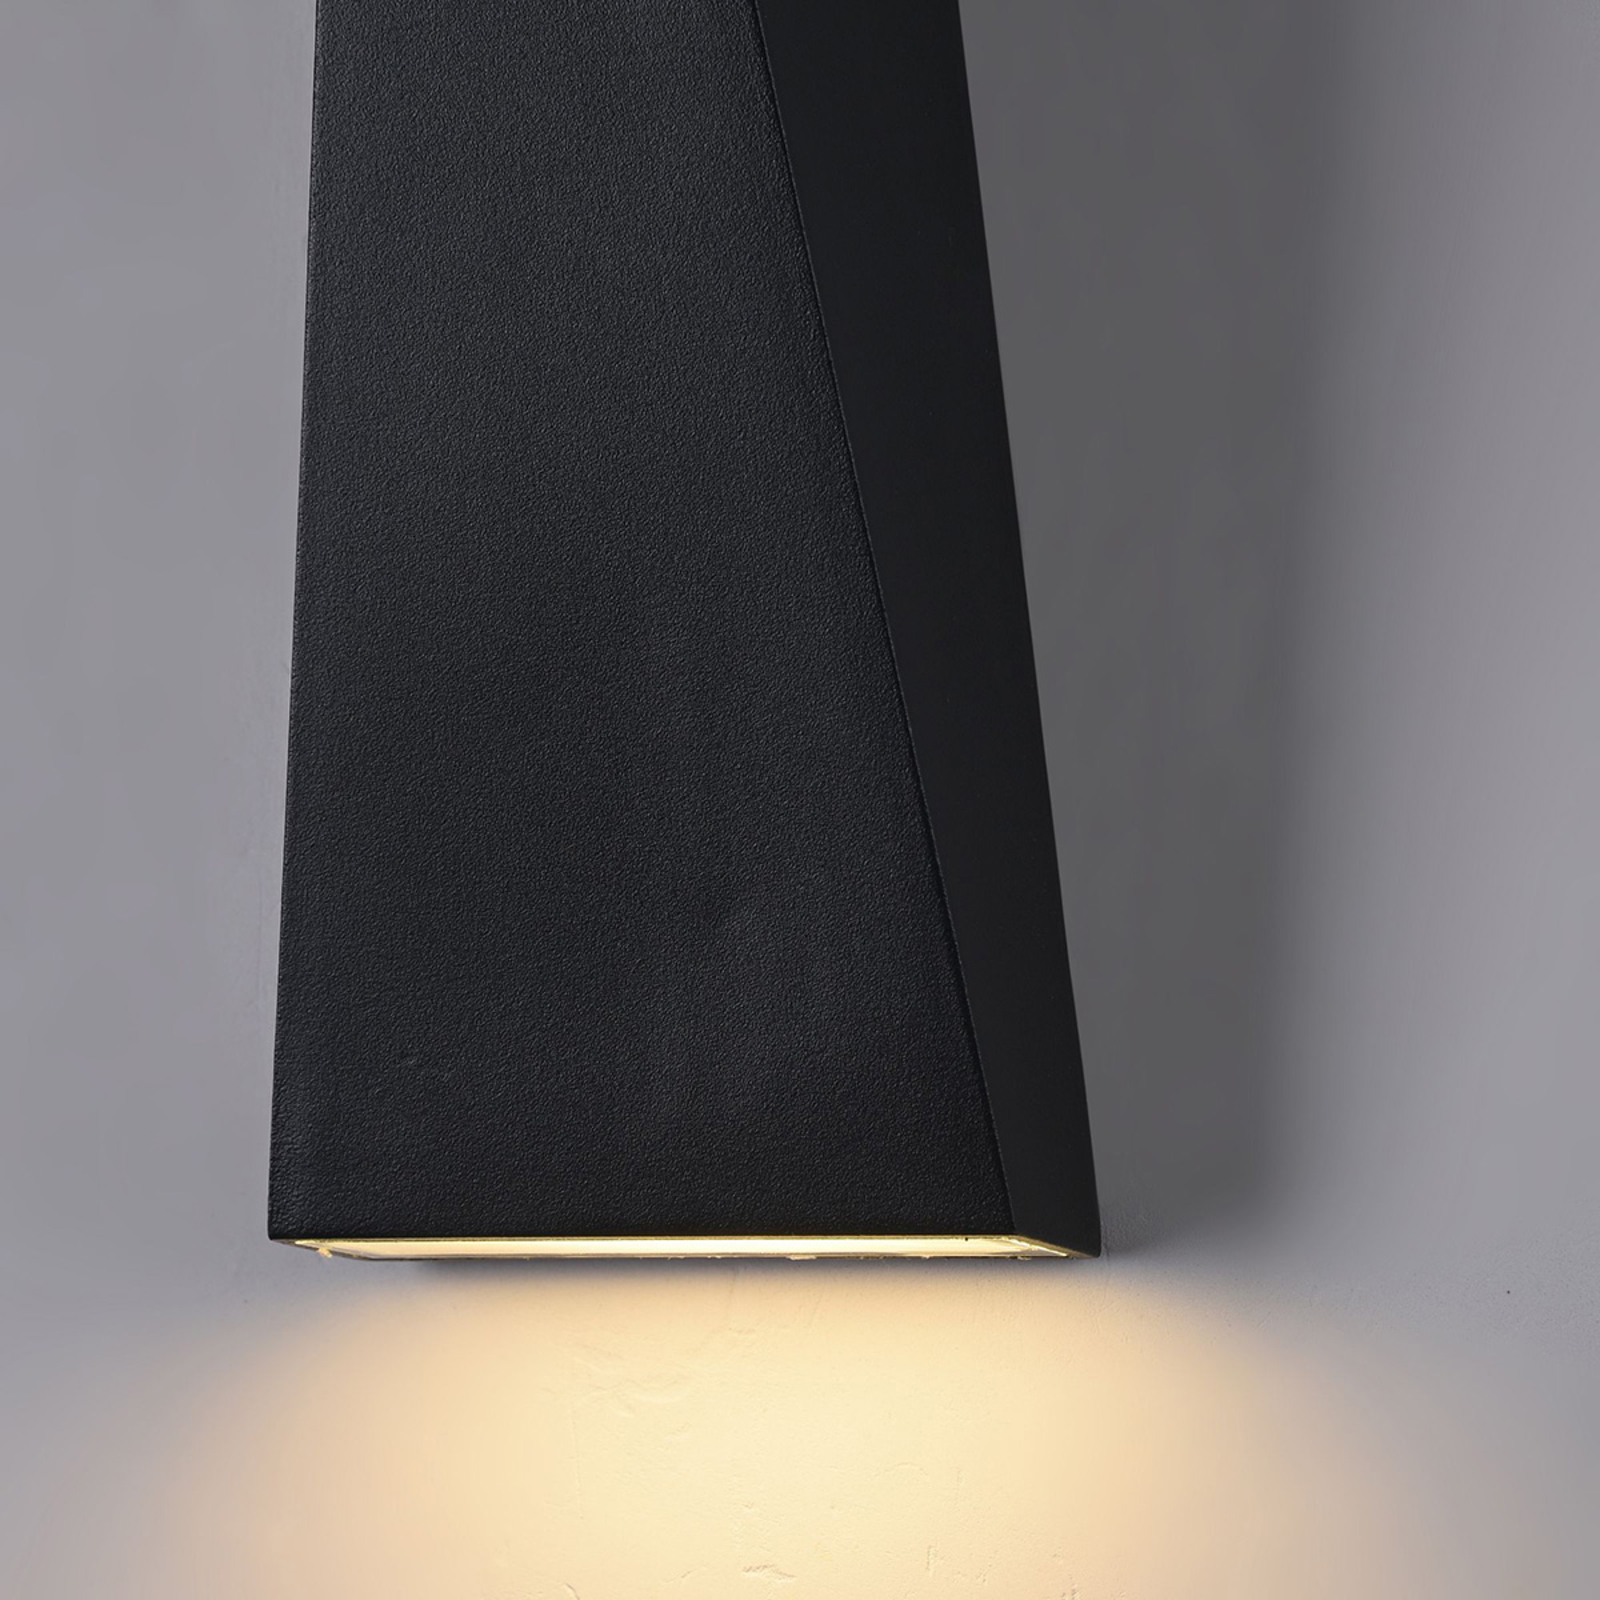 Times Square LED outdoor wall lamp black